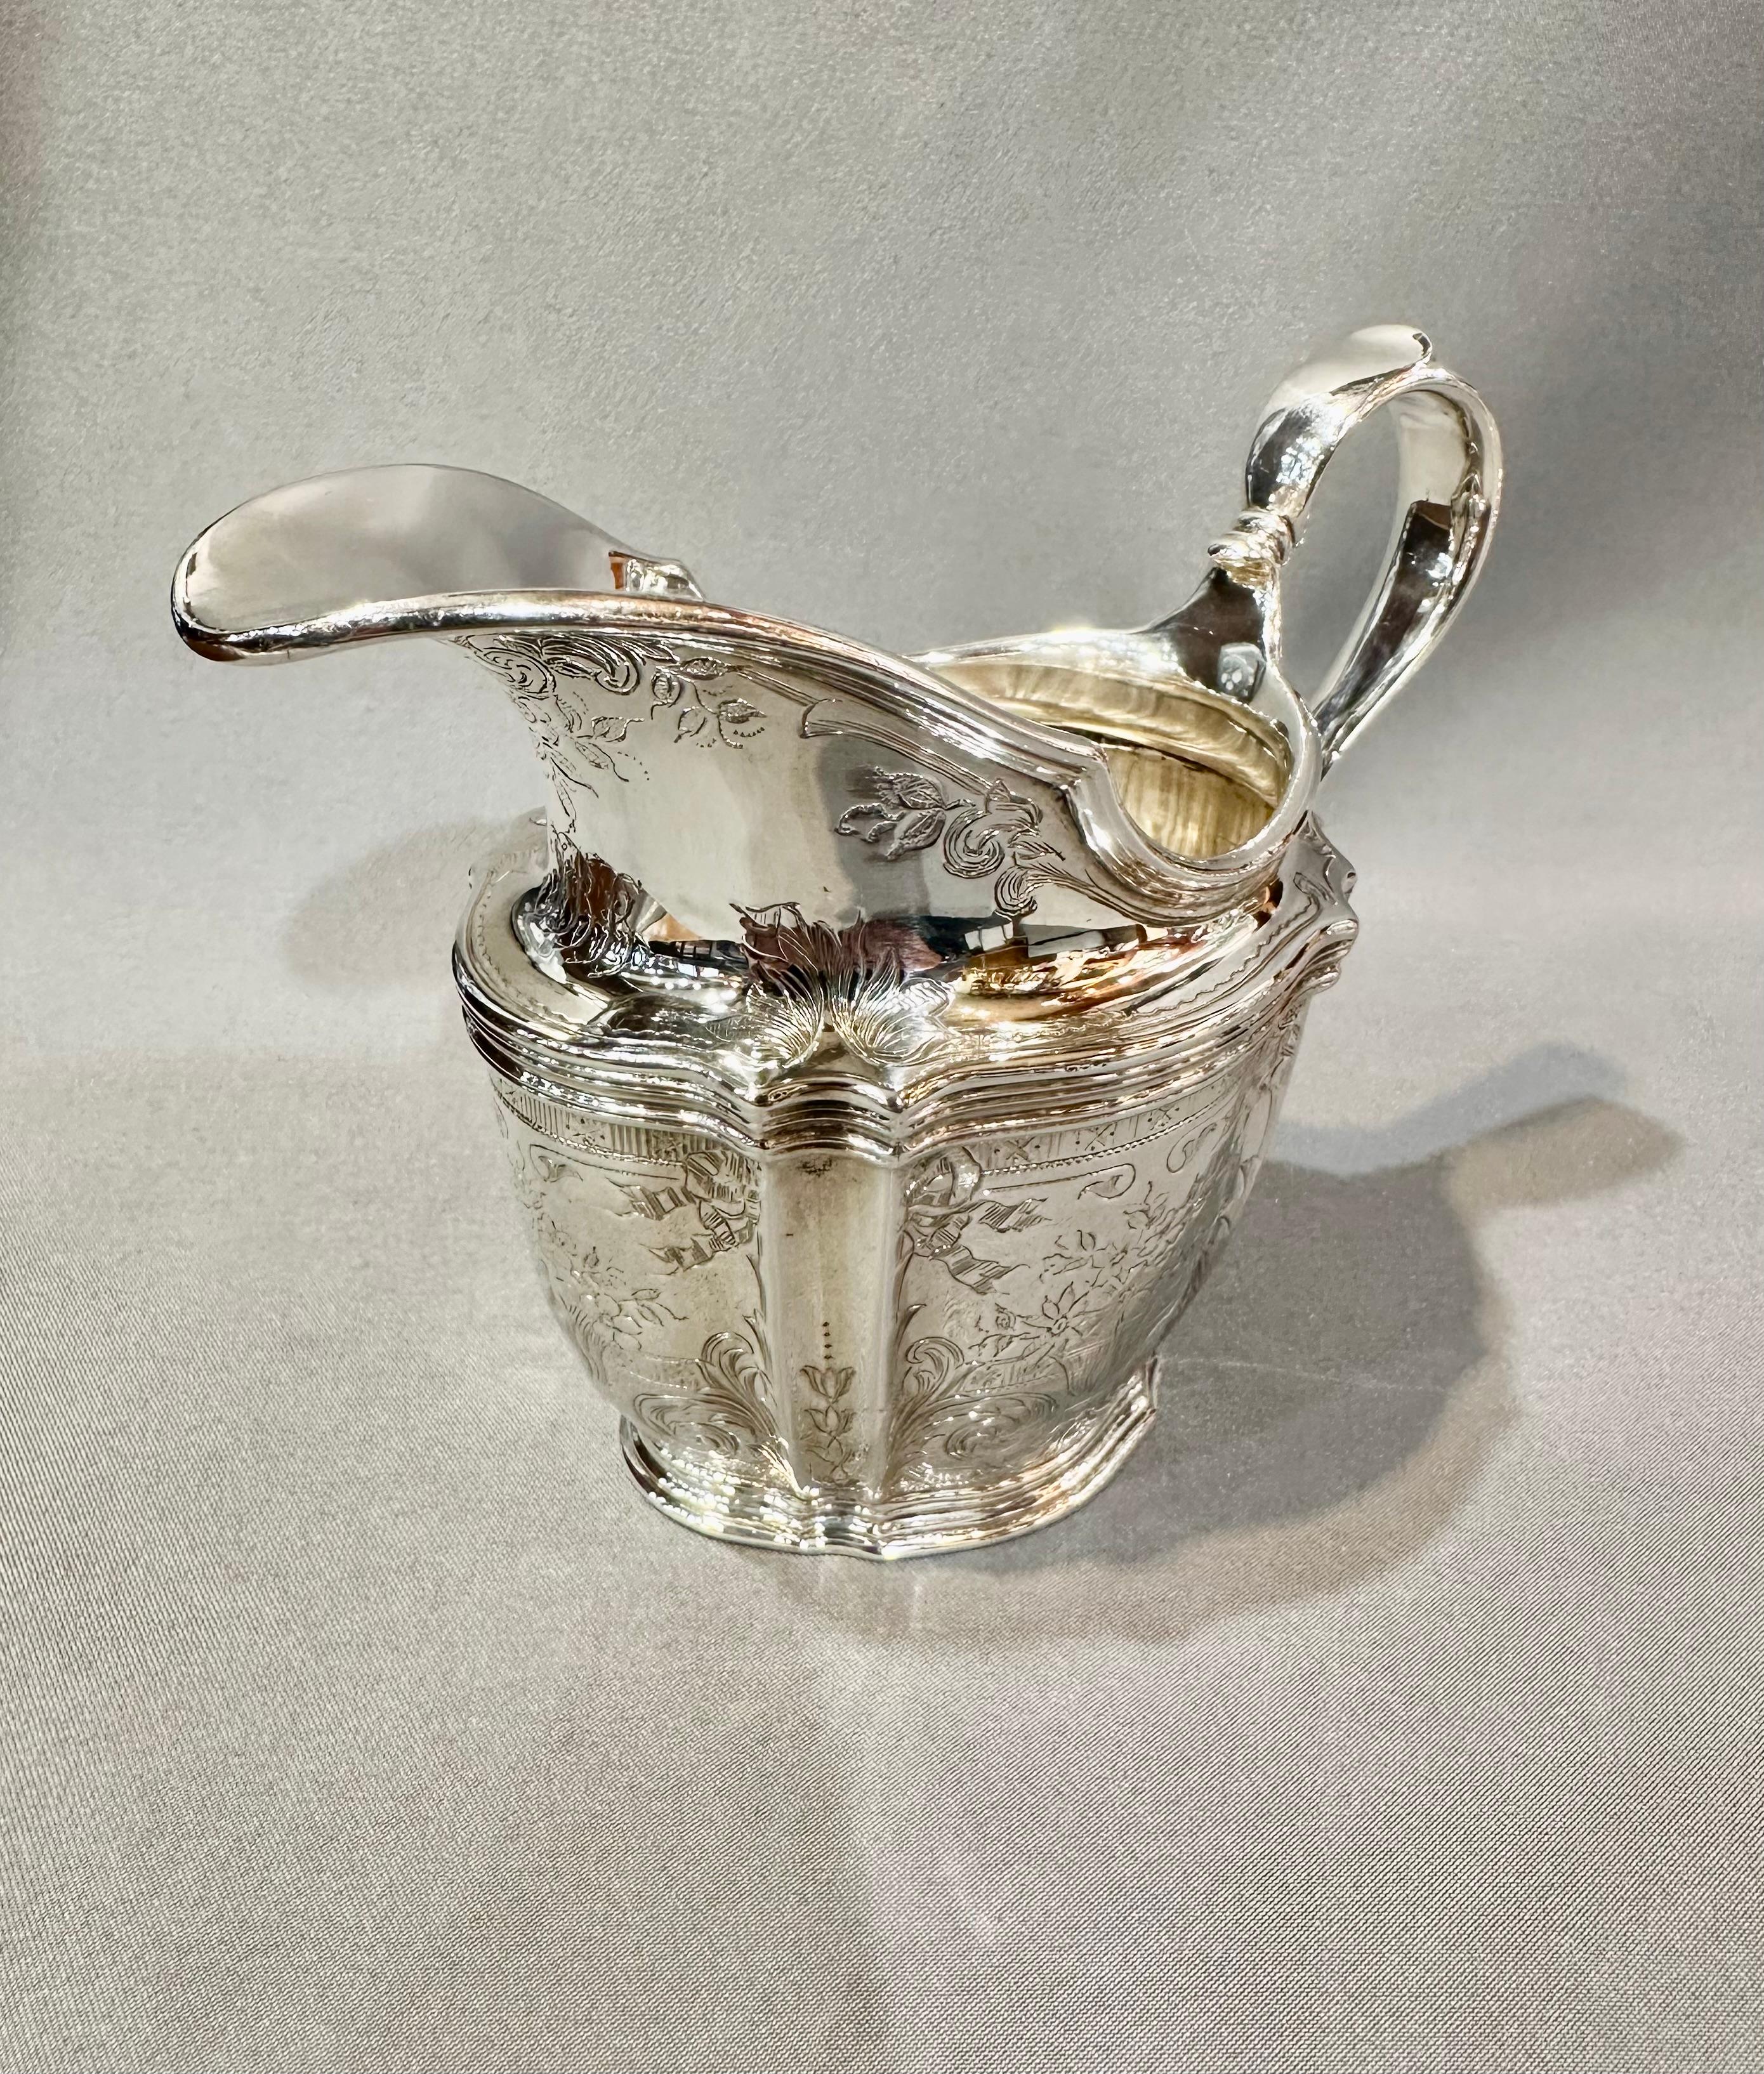 
Fabulous Regency Sterling Silver Coffee or Tea set. Made by Tiffany & Co. in New York. This set comprises 3 pieces: coffeepot/teapot, creamer, sugar.
In the celebrated pattern that is an American Classic, Fluted Serpentine Bodies and Capped Double